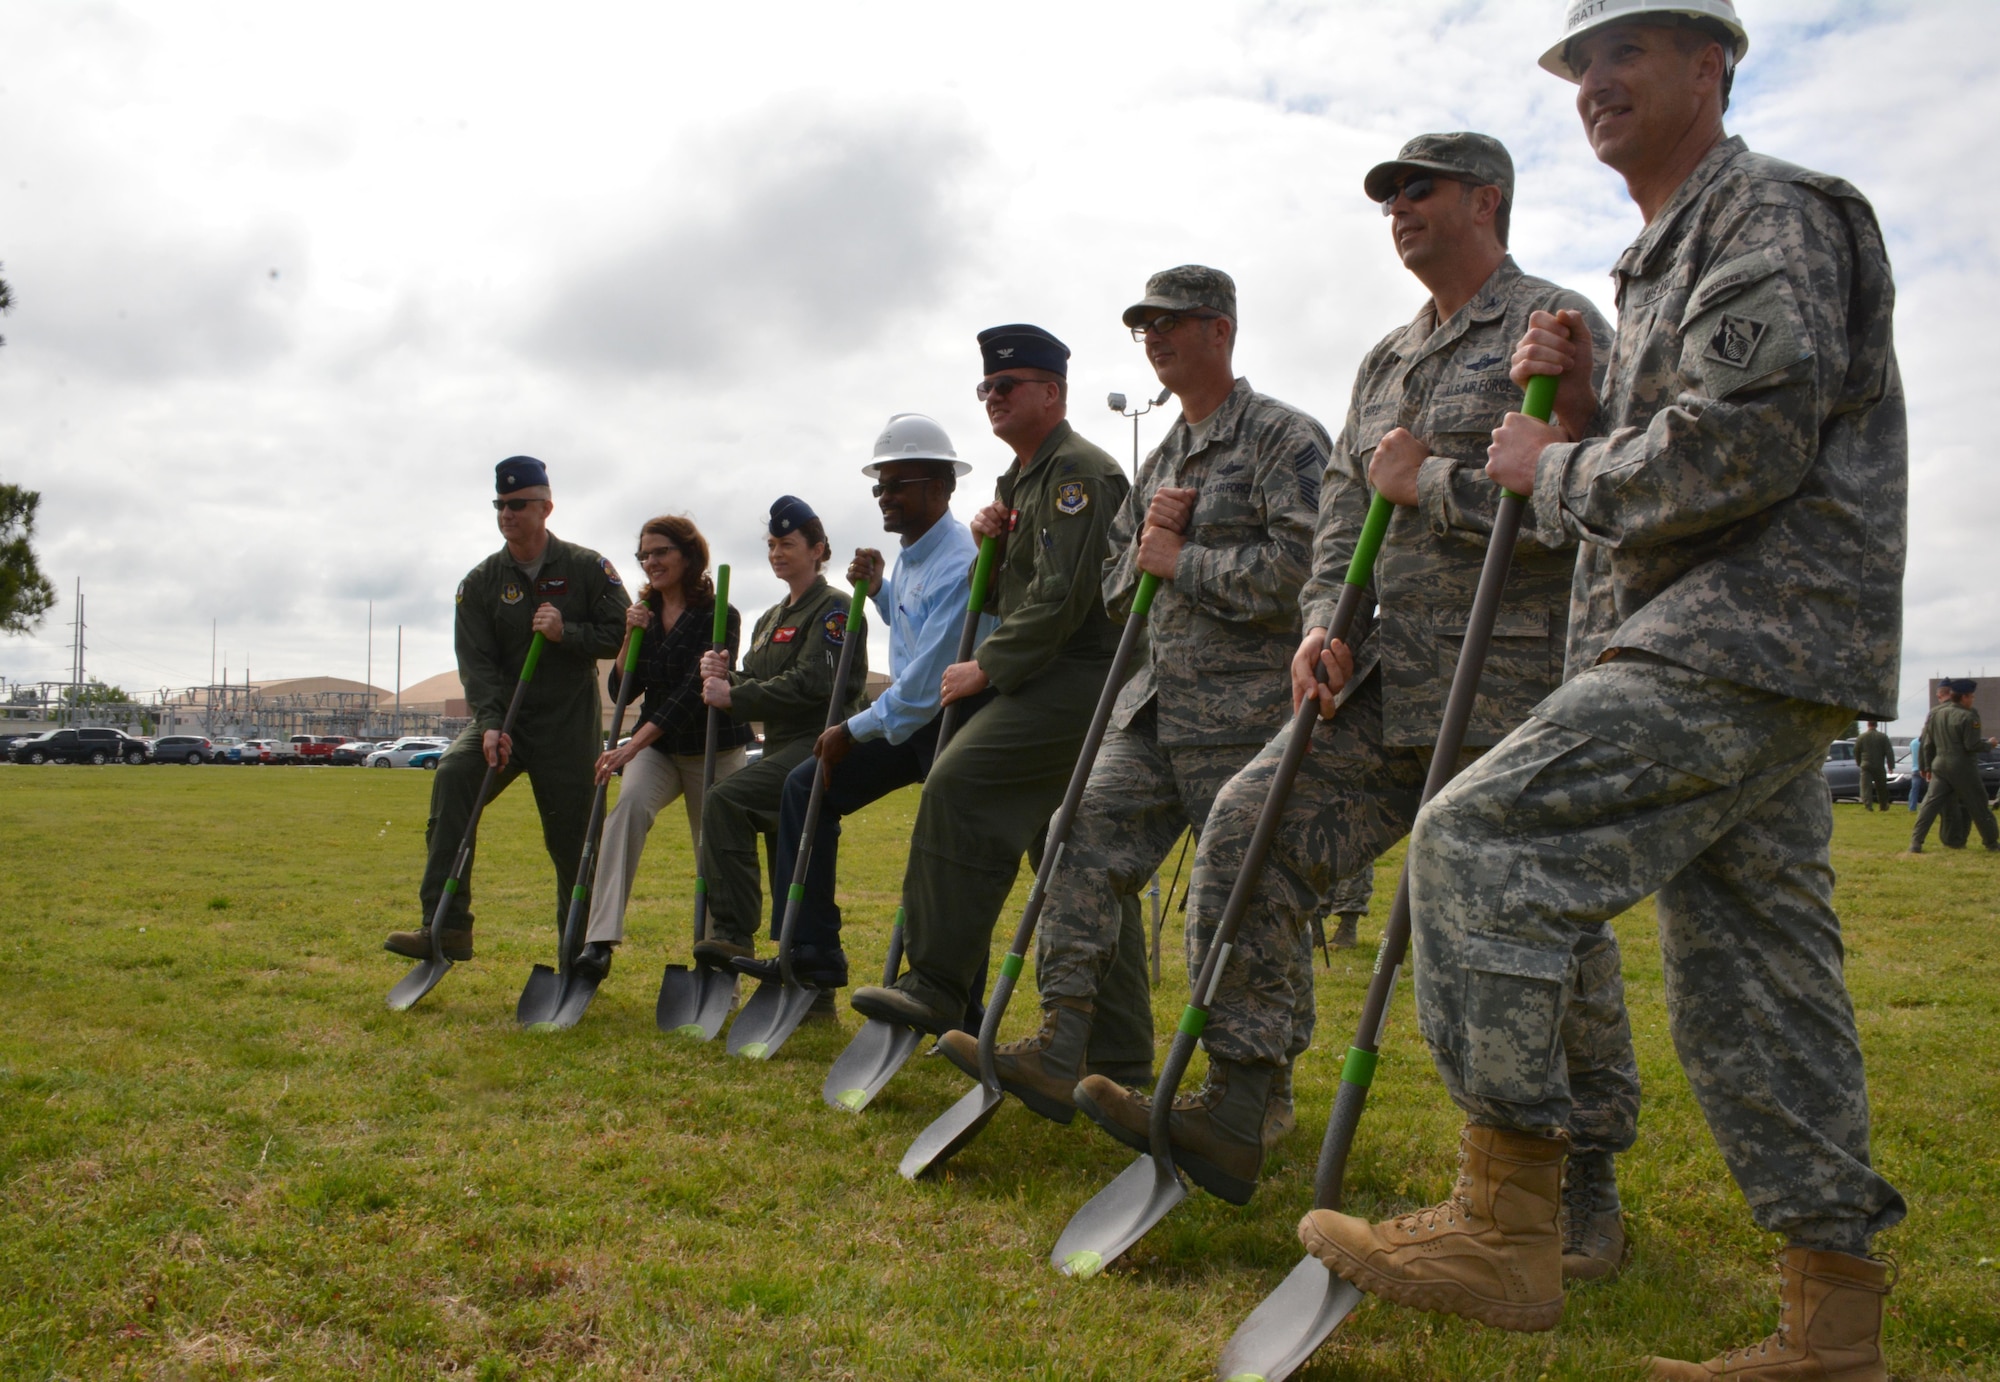 Officials from the 513th Air Control Group, Tinker Air Force Base, Air Force Reserve, Fortis Networks, Inc. and the U.S. Army Corps of Engineers gathered to break ground on the new operations facility April 14 during a ceremony in the field east of the 72nd Air Base Wing Headquarters, Bldg. 460. The 32,000 sq. ft. facility will allow the currently physically separated units to have a consolidated Air Control Group Headquarters, Operations Support Flight and Airborne Air Control Squadron facility.  The building is scheduled to be completed by January 2018. (U.S. Air Force photo/Maj. Jon Quinlan)